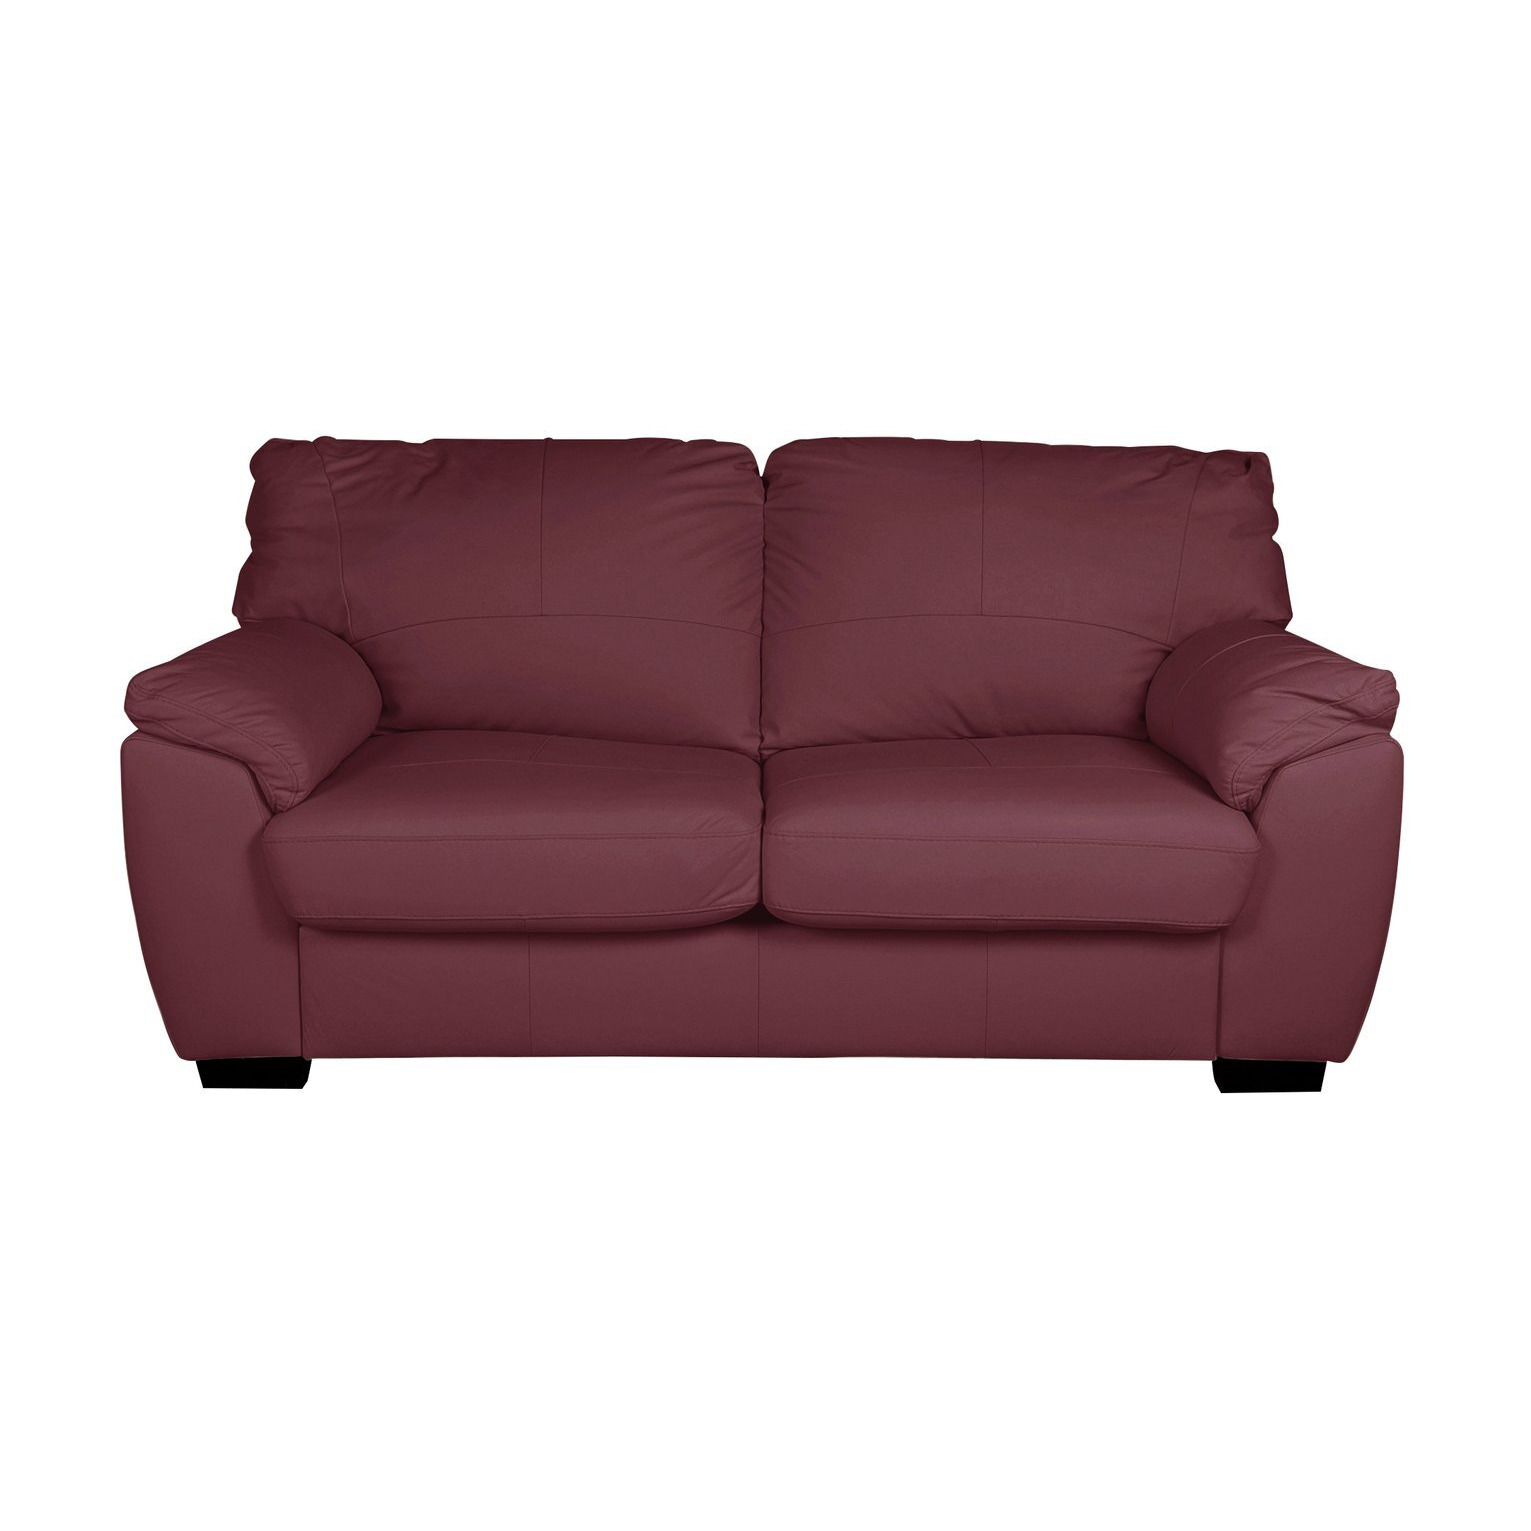 Argos Home Milano Leather 2 Seater Sofa Bed- Burgundy - image 1